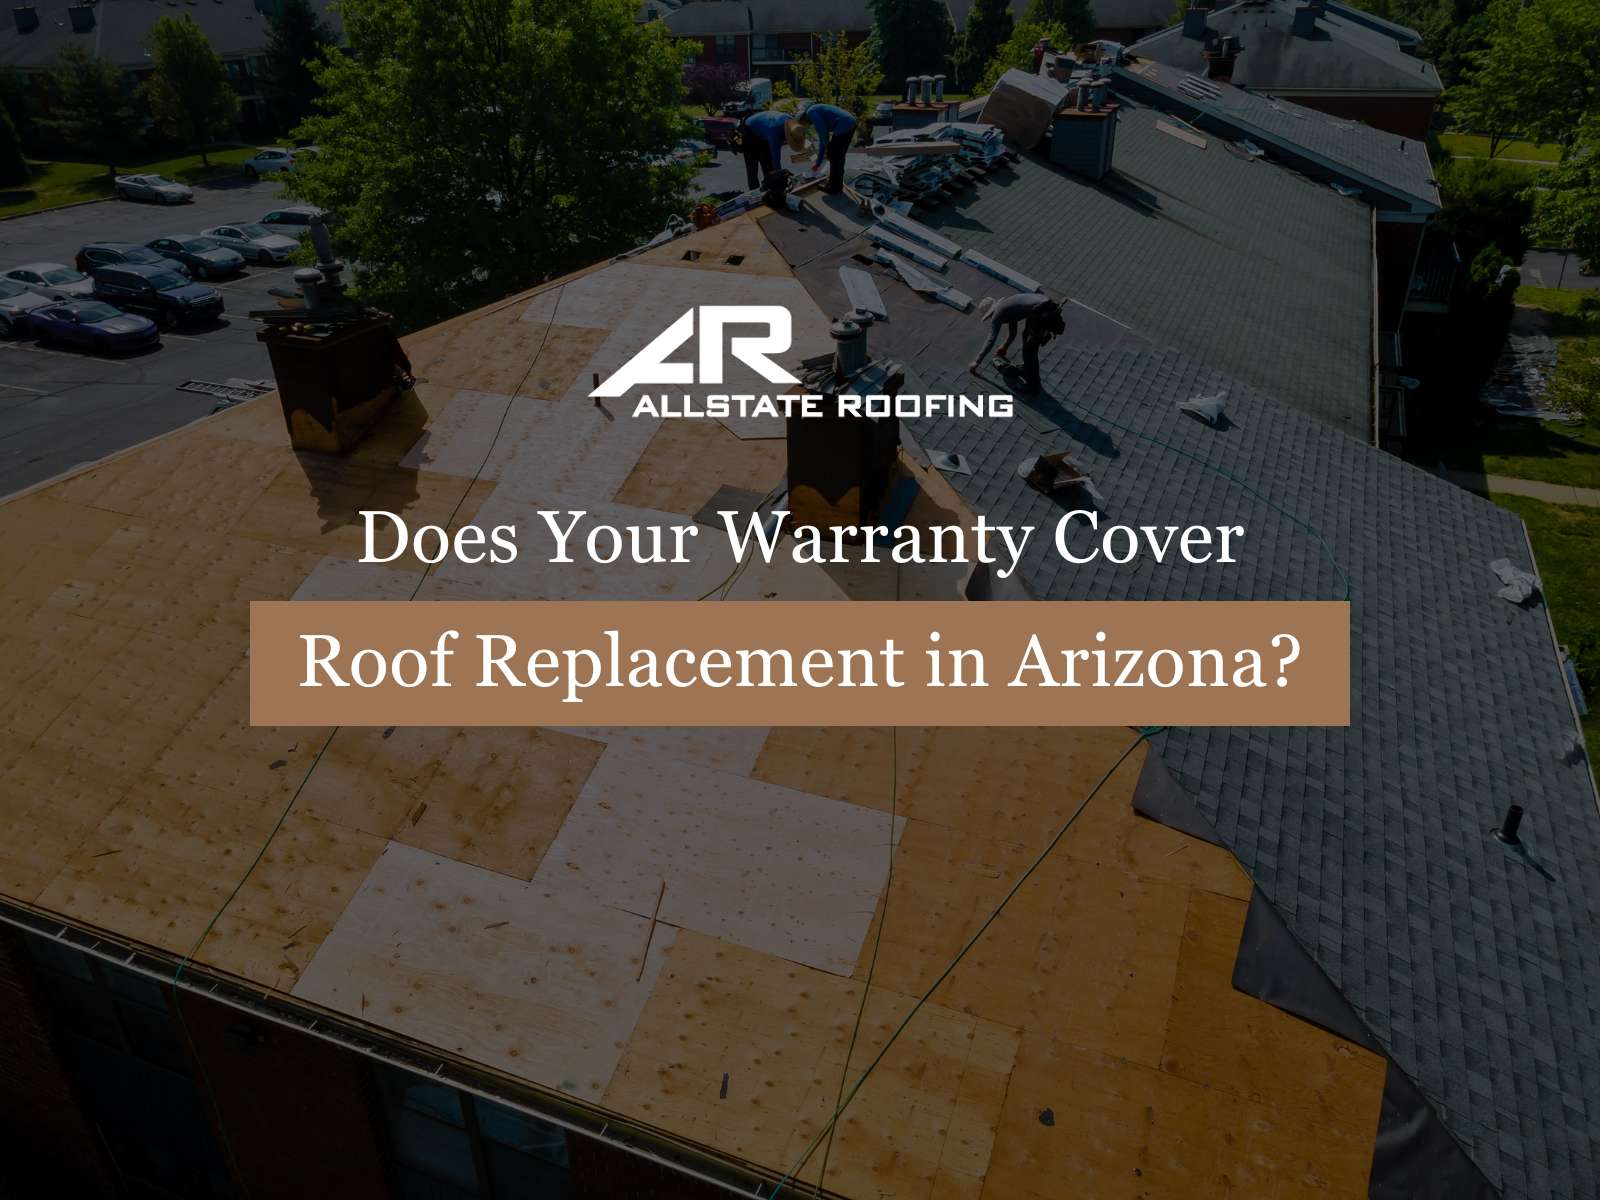 Does Your Warranty Cover Roof Replacement in Arizona?